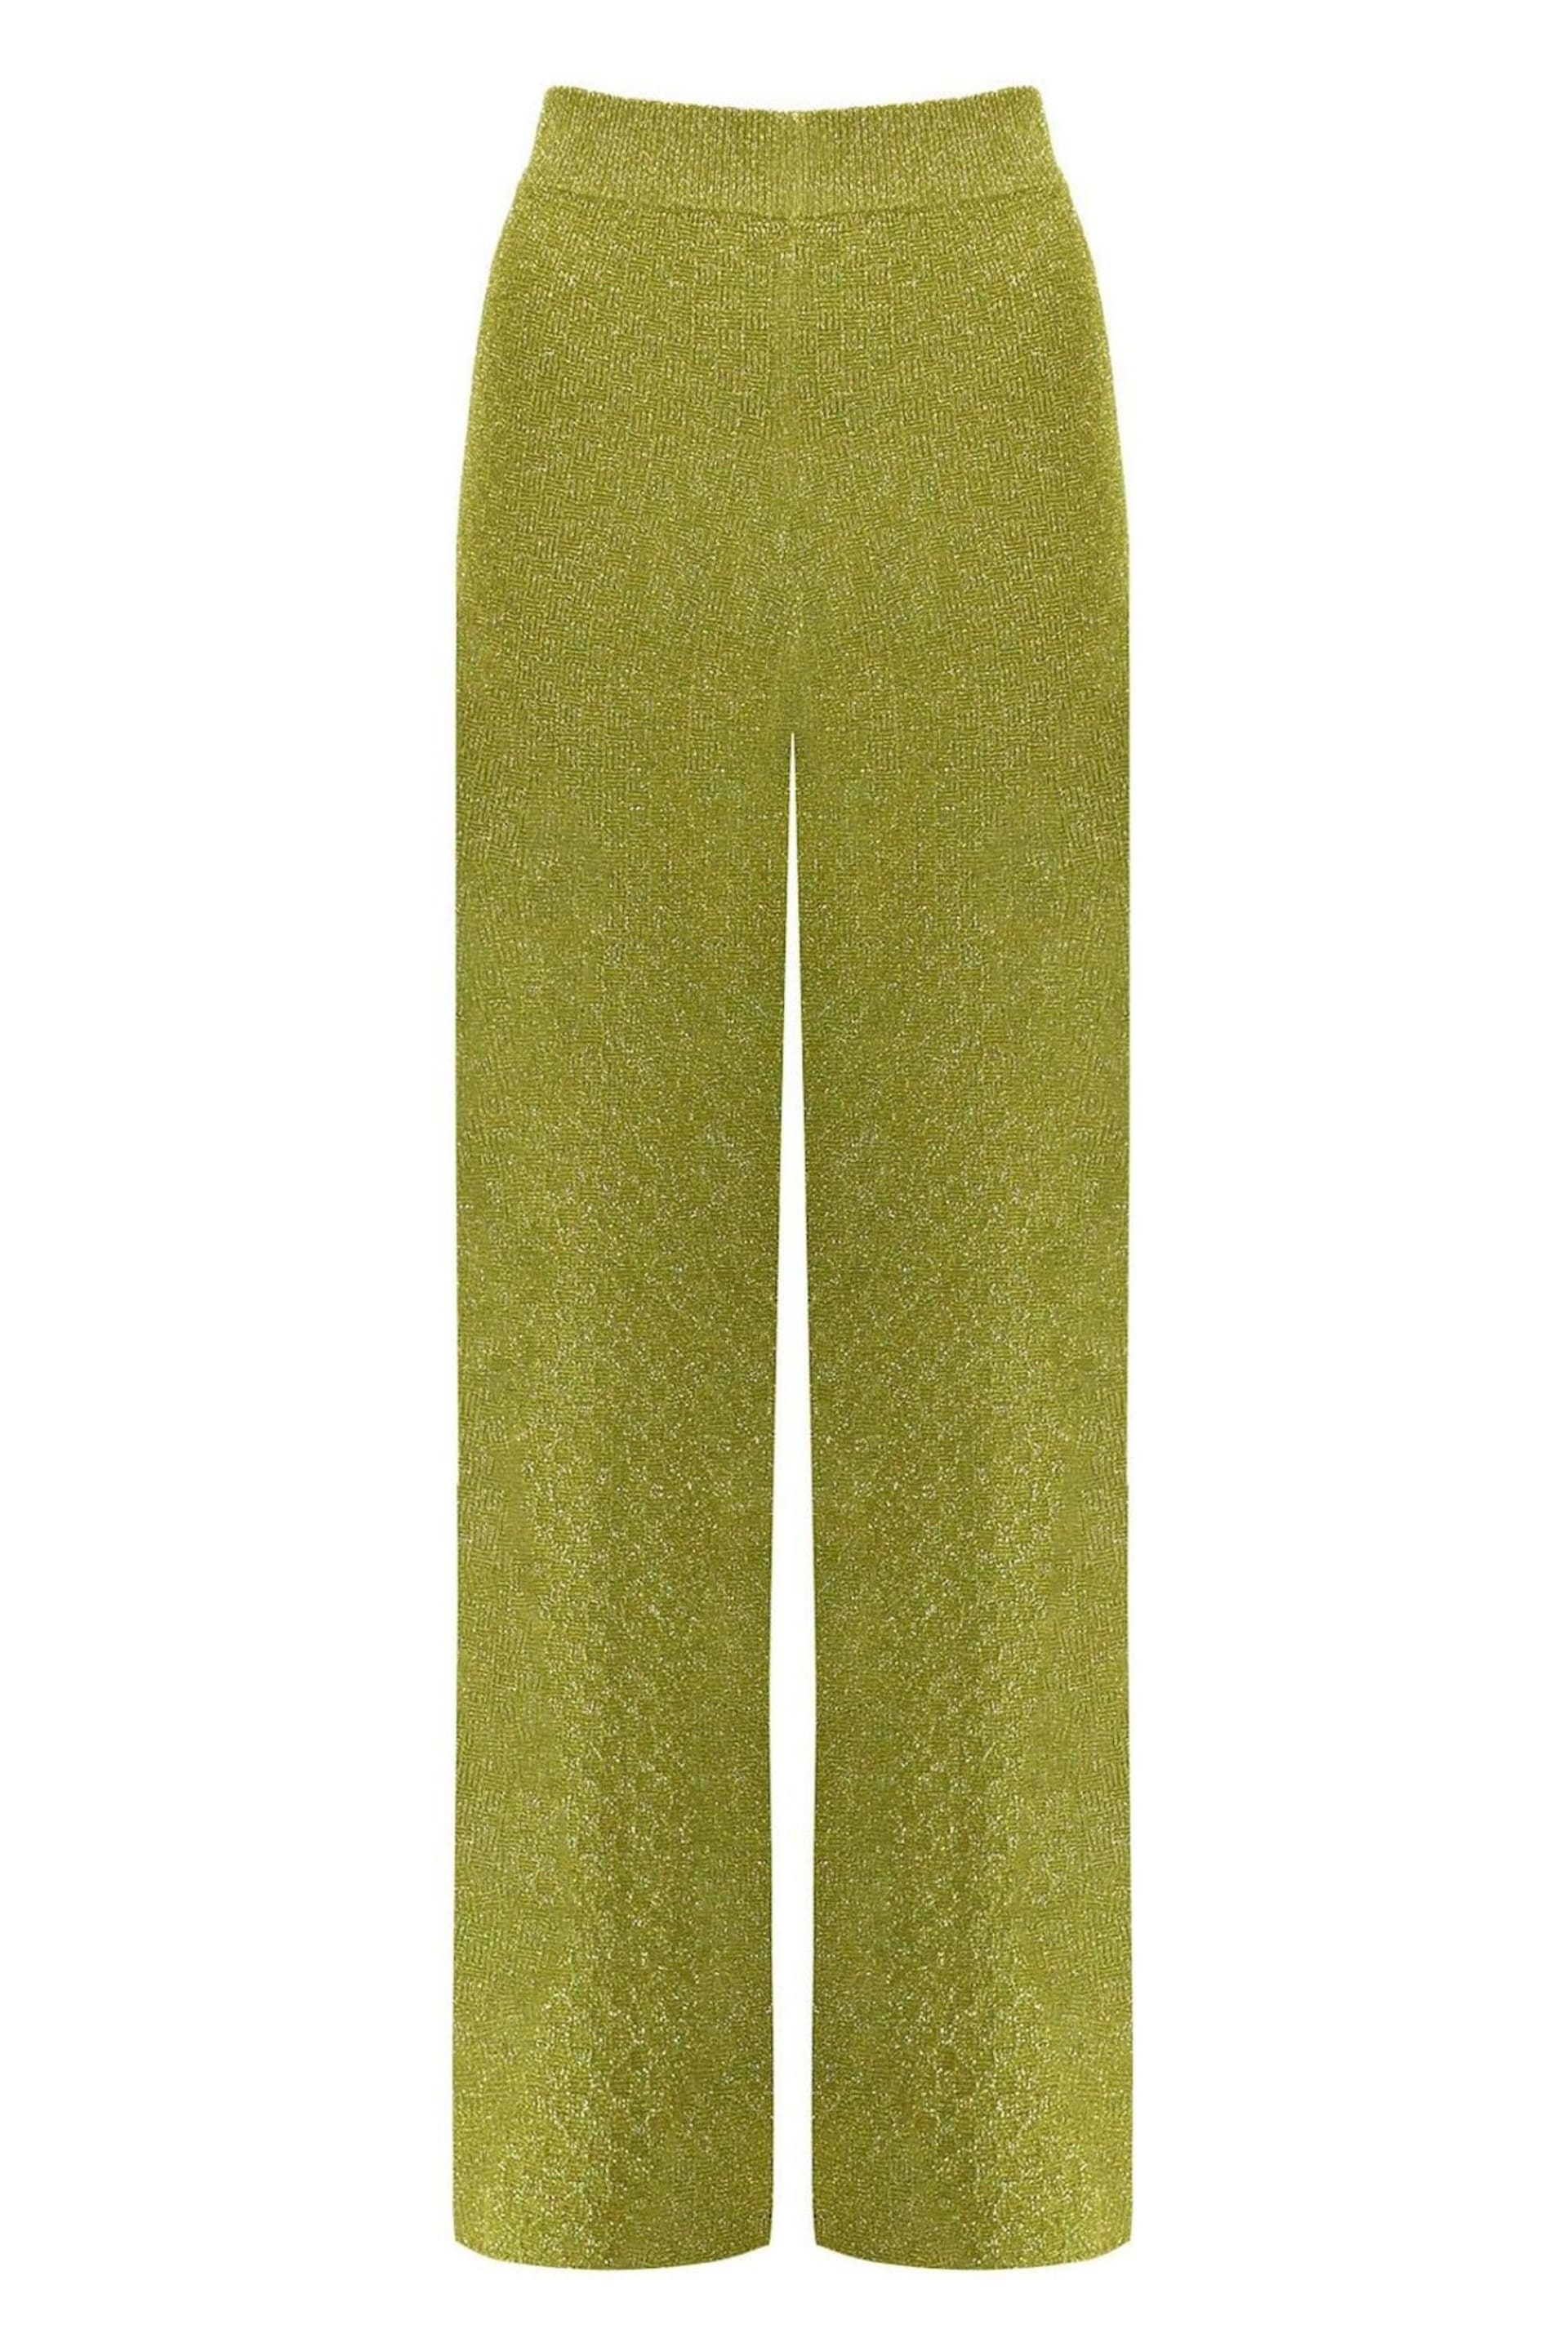 Ro&Zo Green Sheer Sparkle Knit Flared Trousers - Image 6 of 7